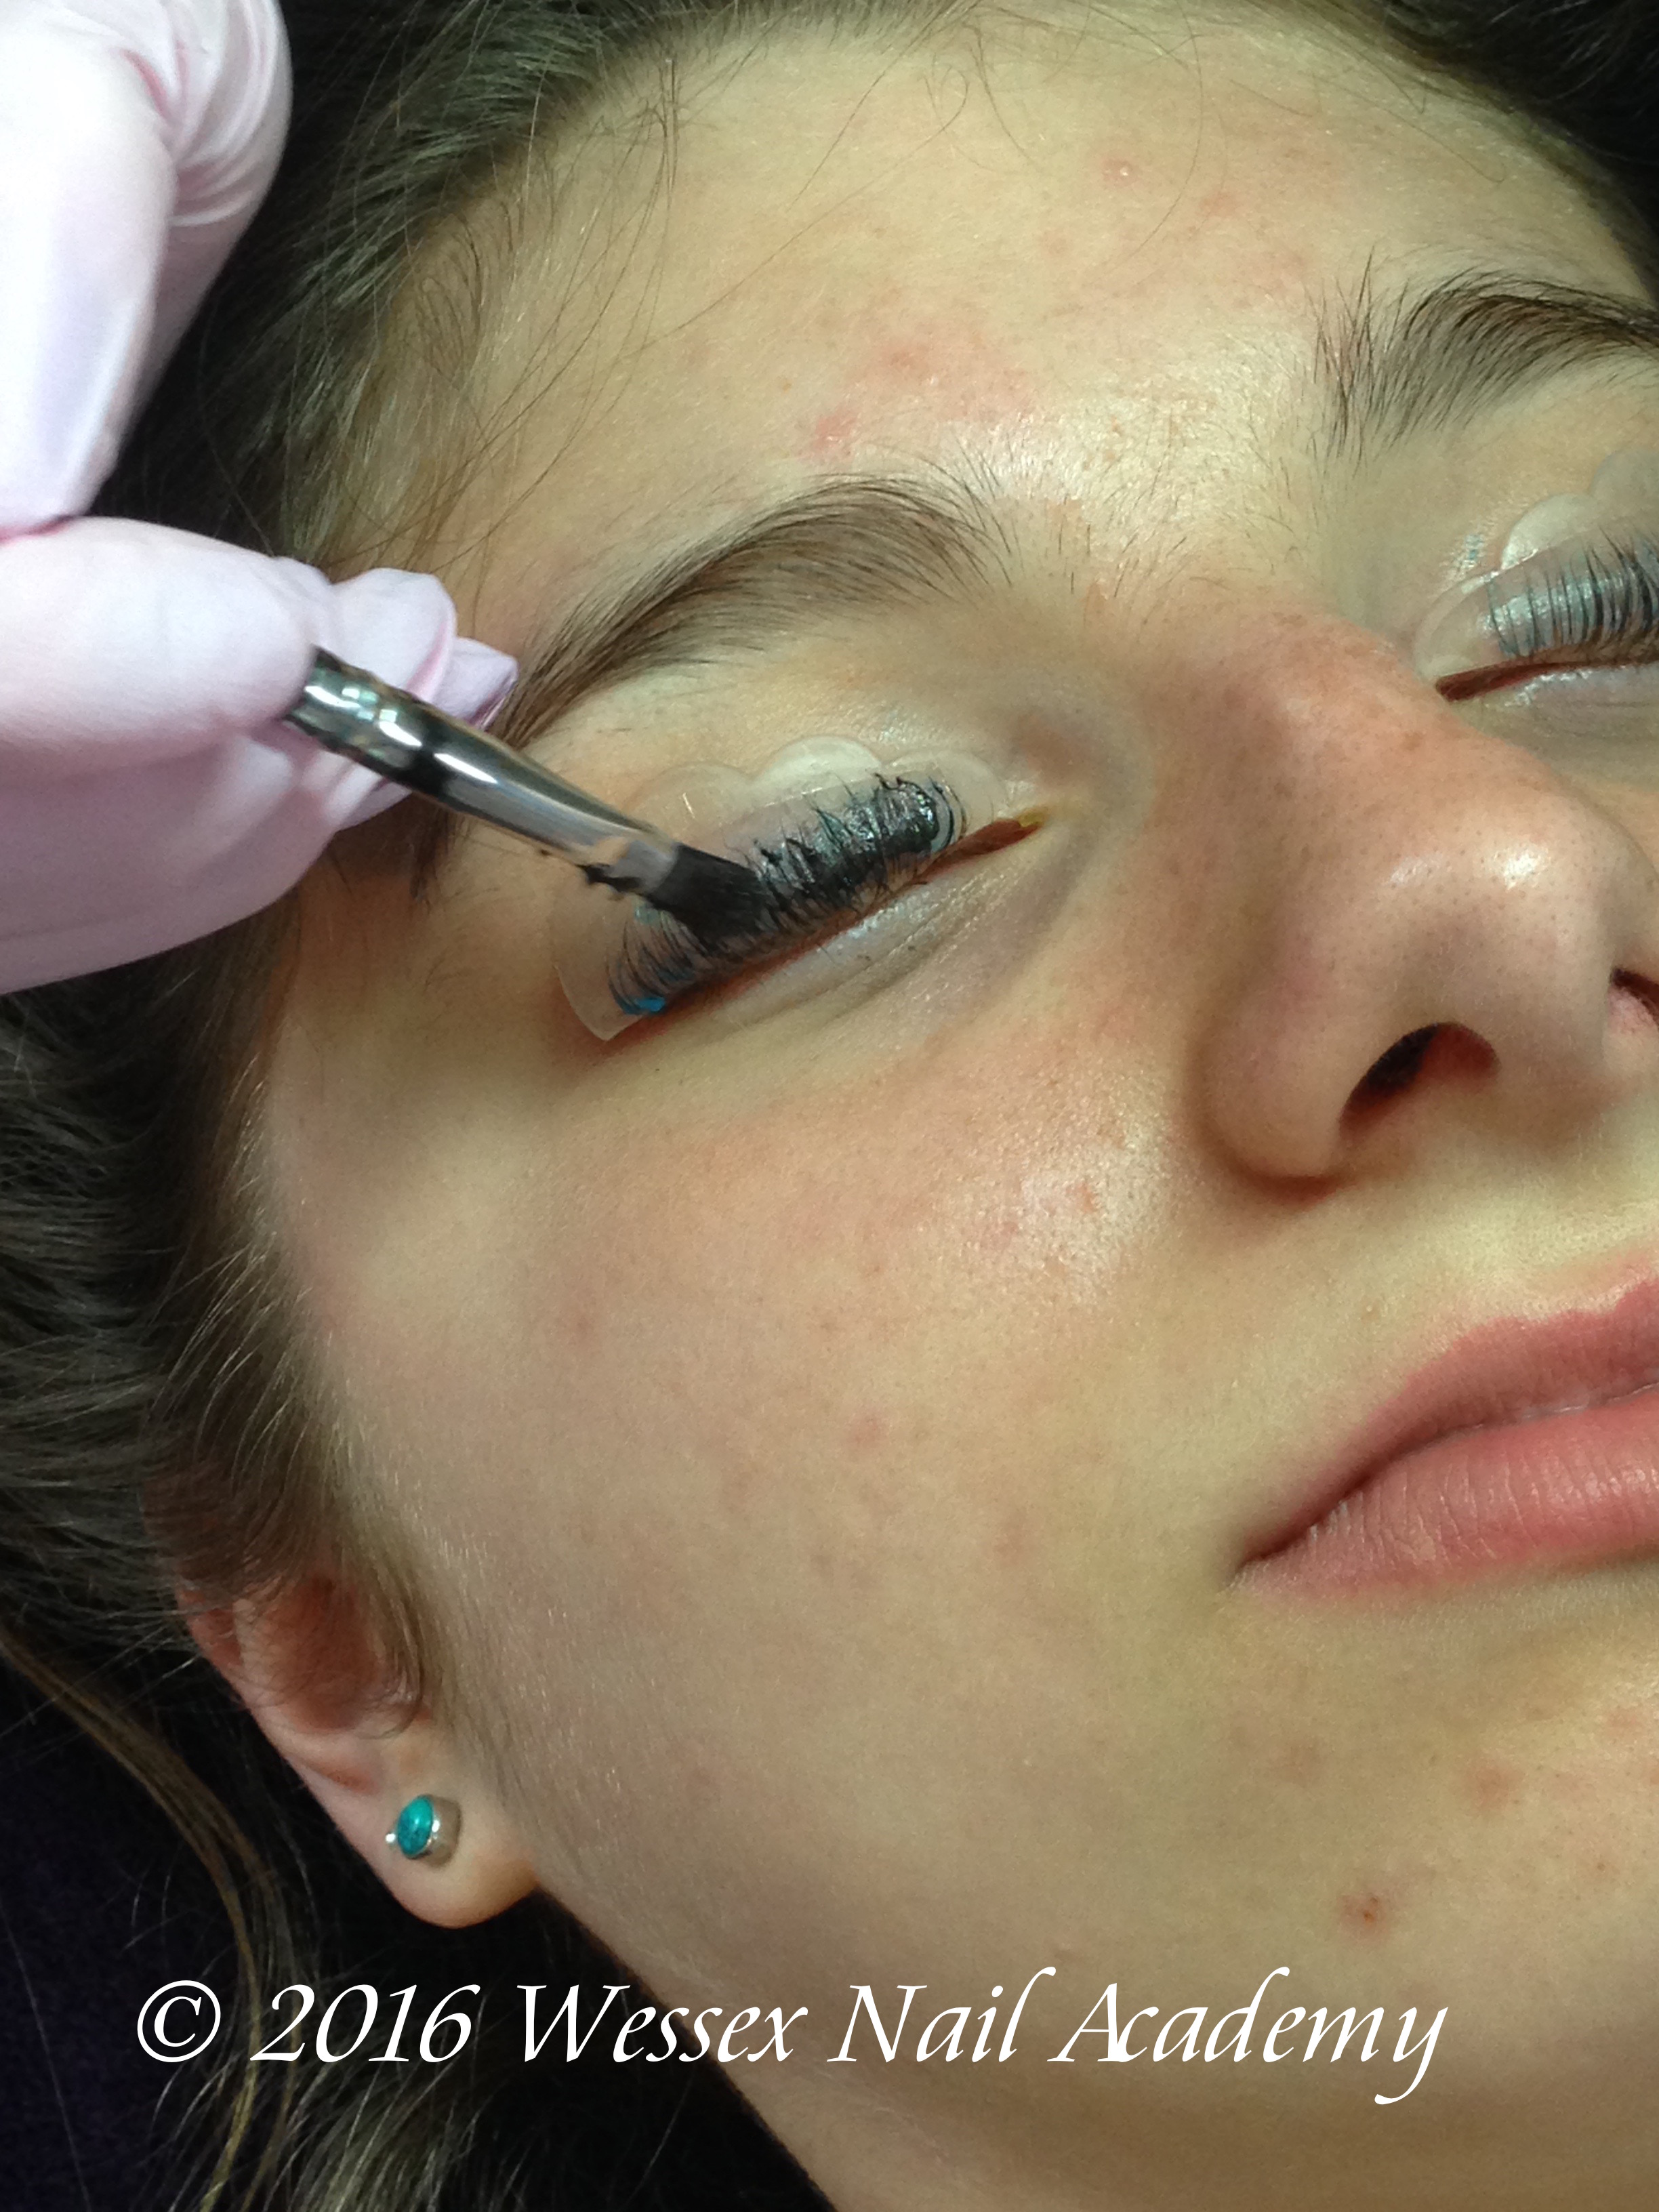  Lash Lifting and Perming Lash and Brow Tinting training course, Wessex Nail Academy Okeford Fitzpaine, Dorset